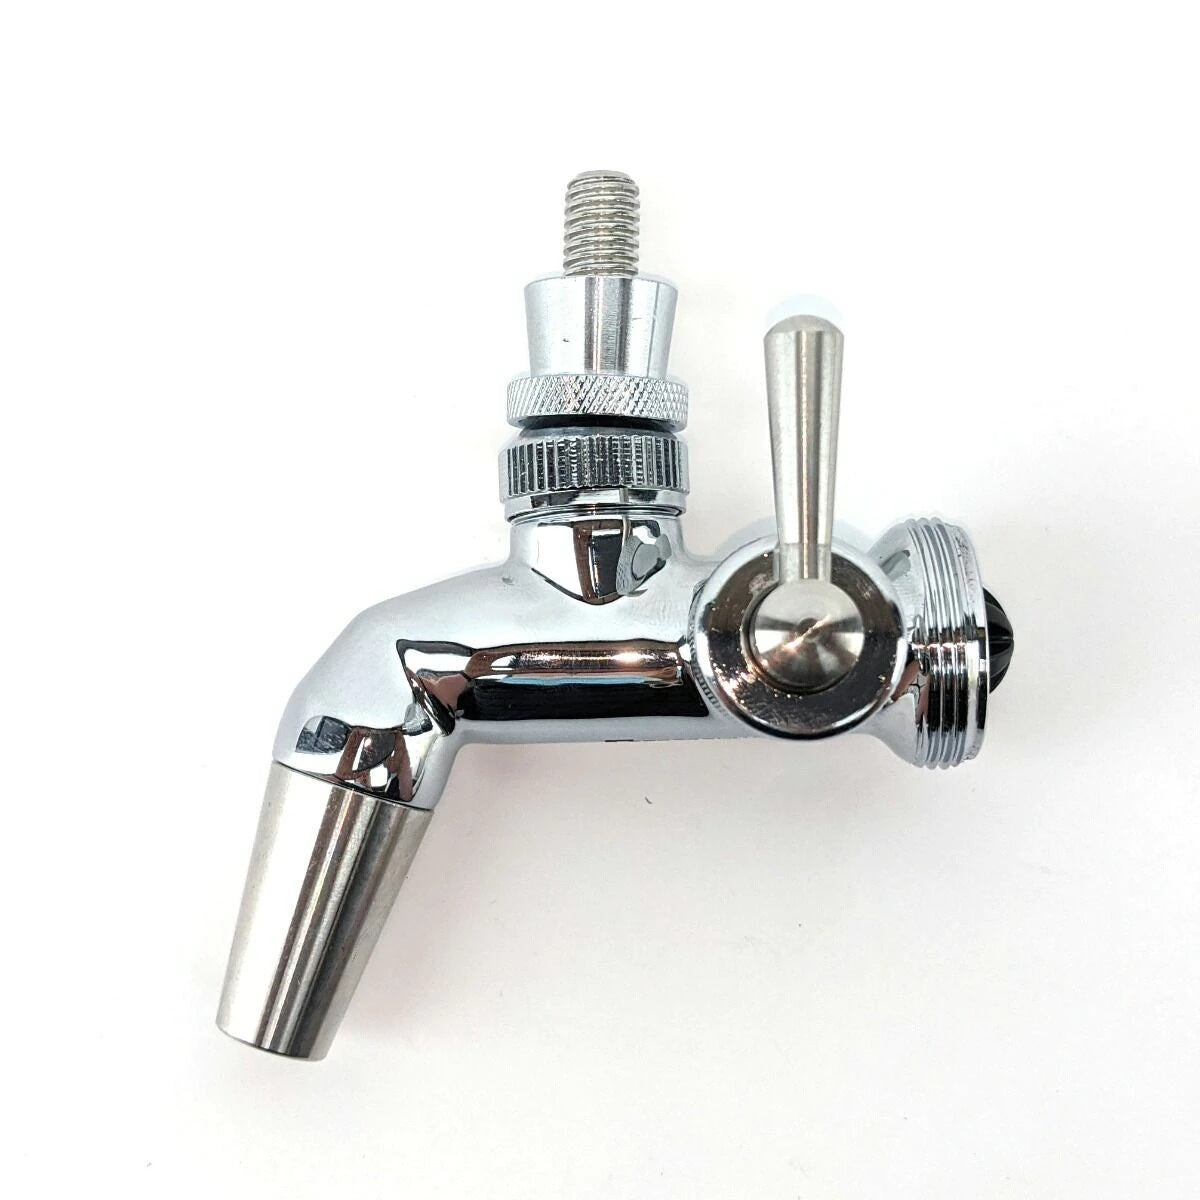 Nukatap - Flow Control - Stainless Steel Forward Sealing Tap - All Things Fermented | Home Brew Shop NZ | Supplies | Equipment